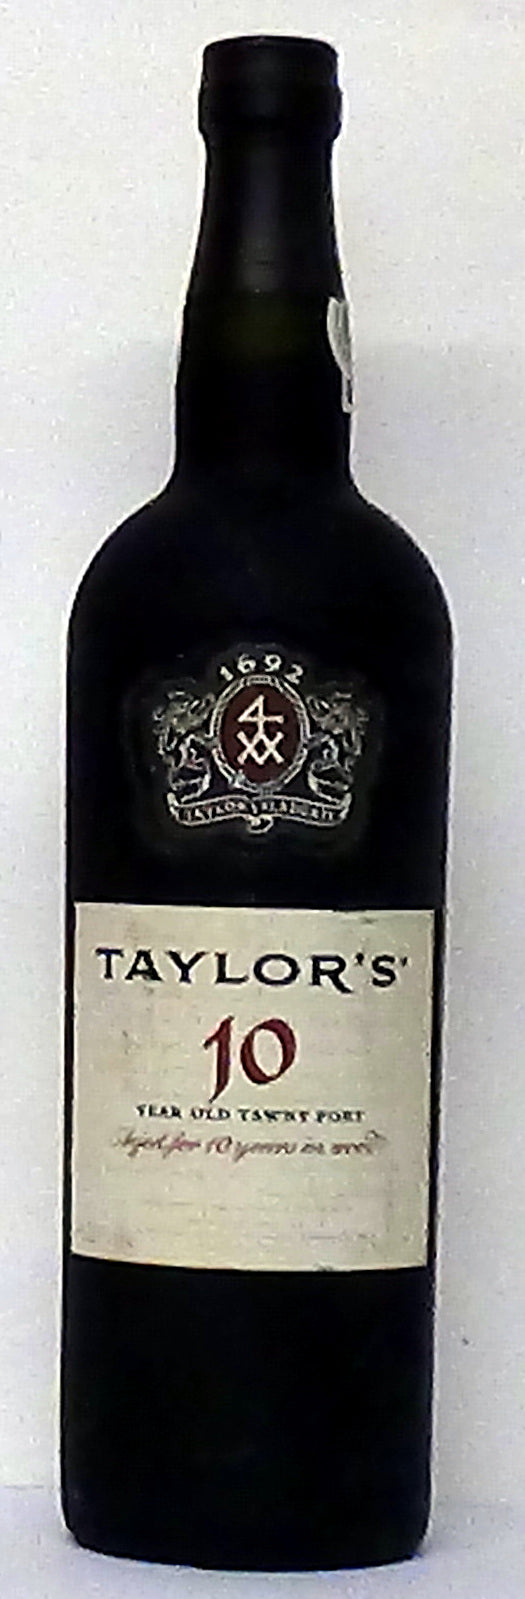 2010’s Taylor’s 10 Year Old Tawny Port